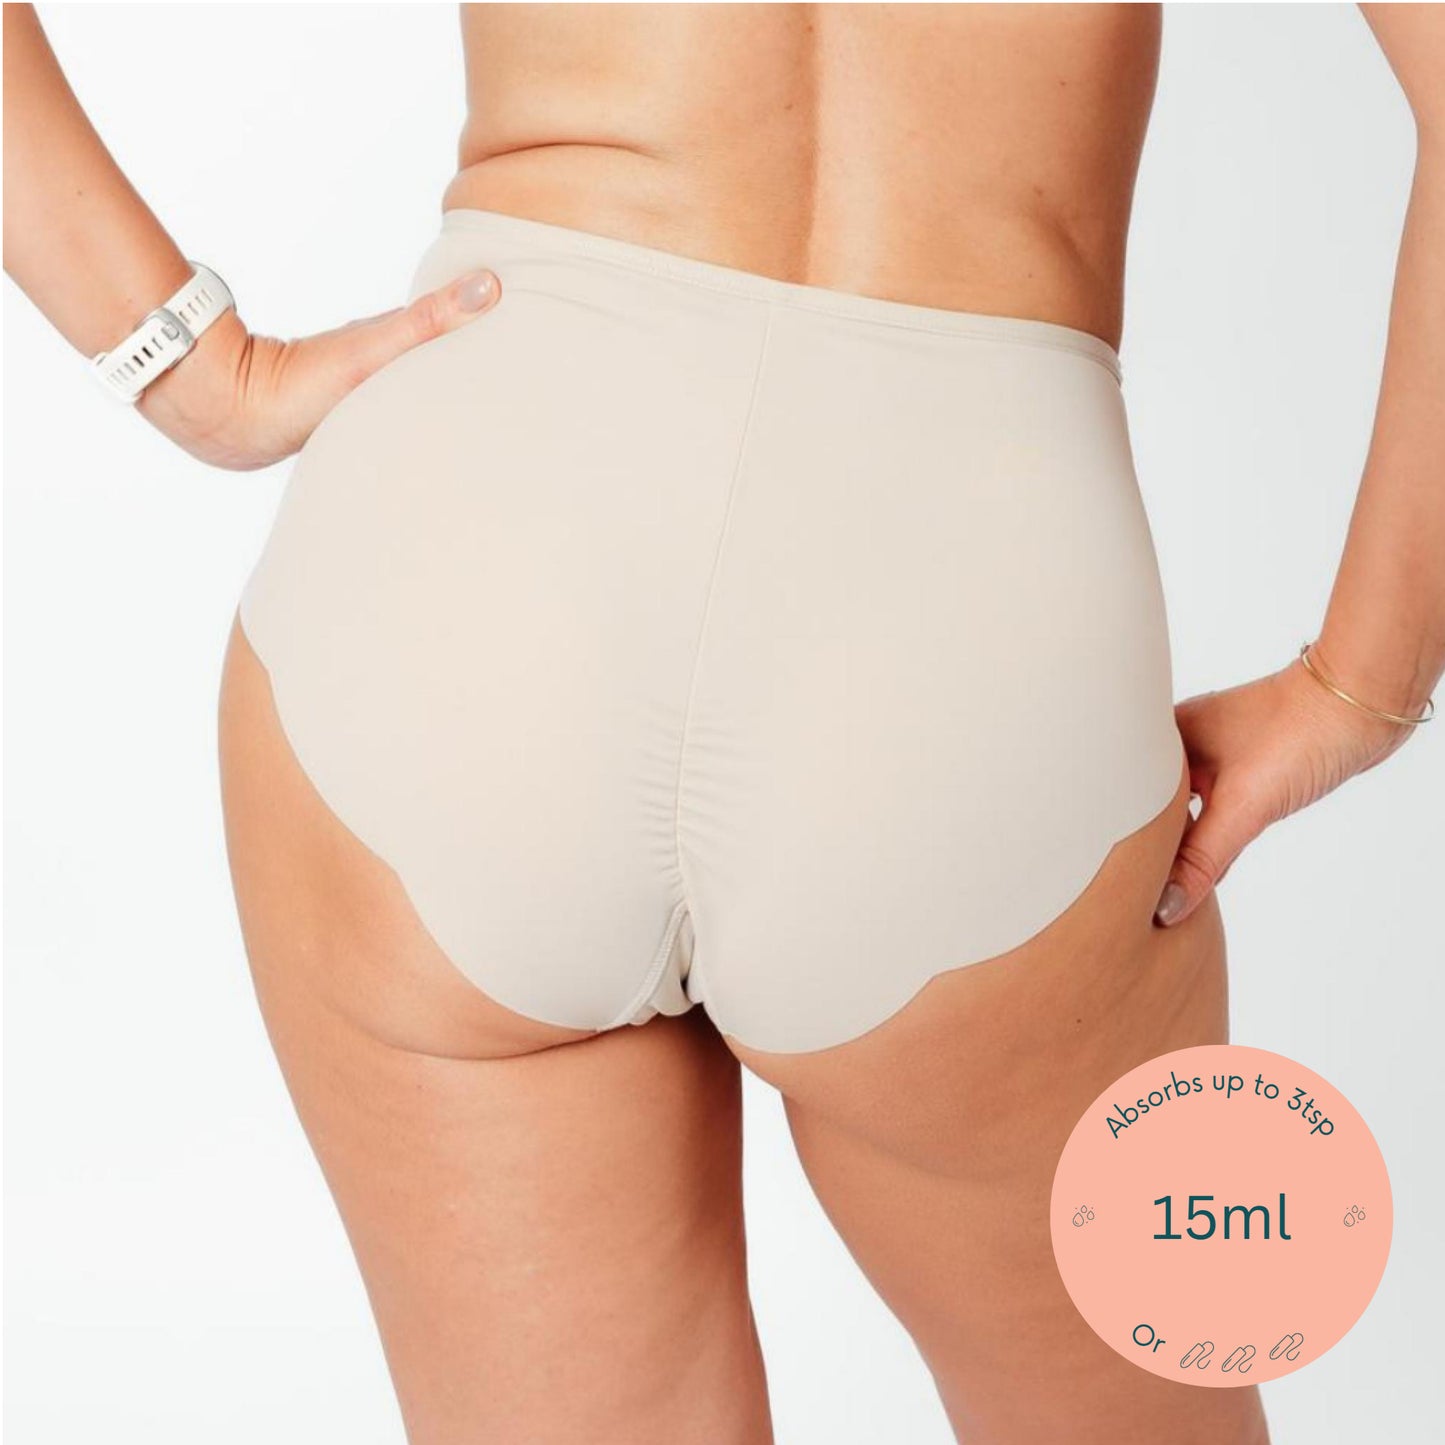 Nixi Body, Incontinence Period Knickers